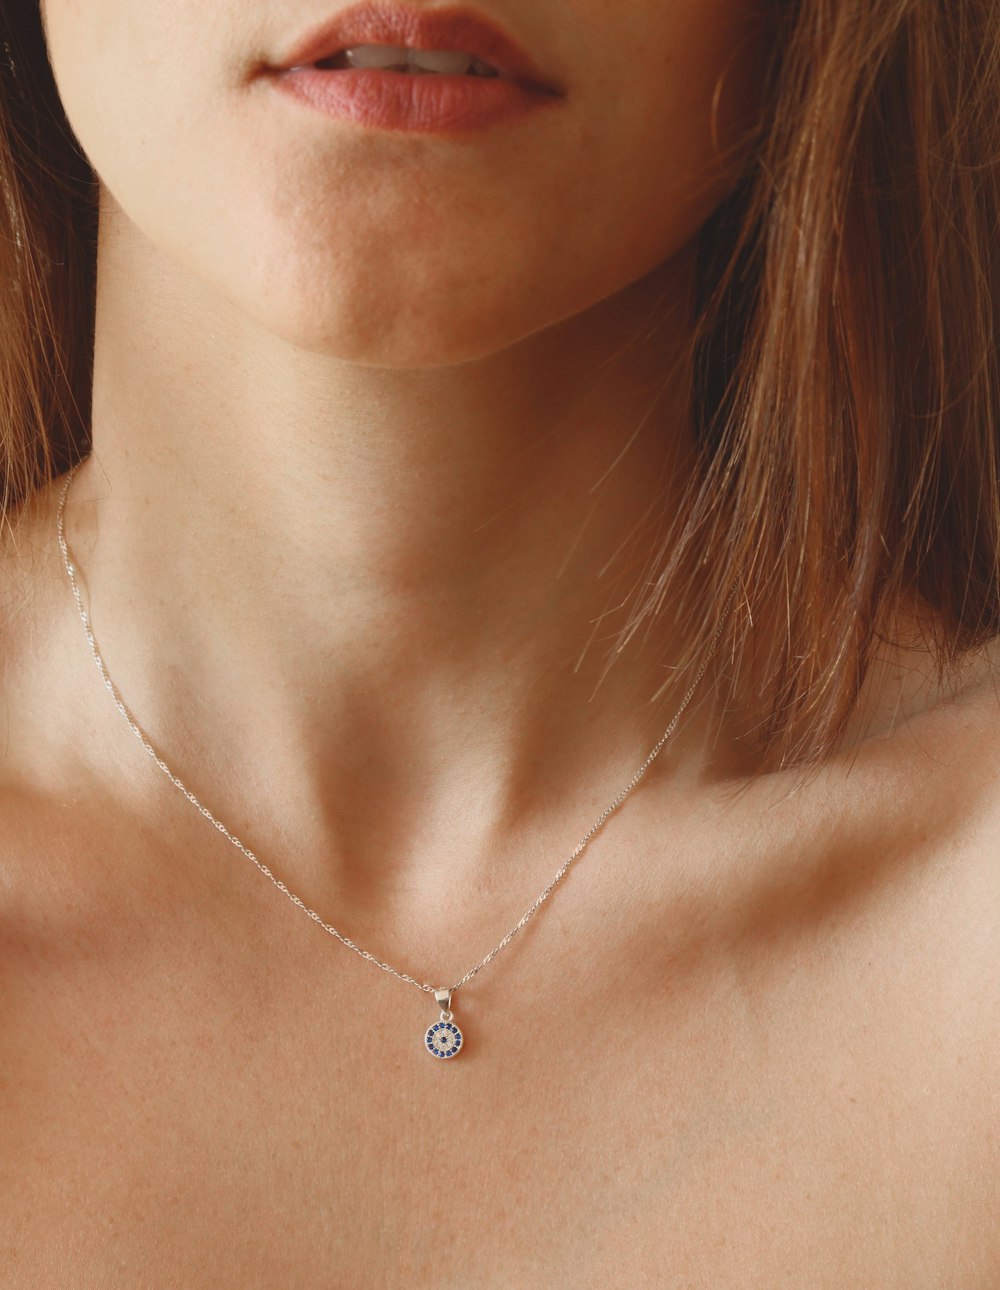 woman wearing silver necklace with heart pendant